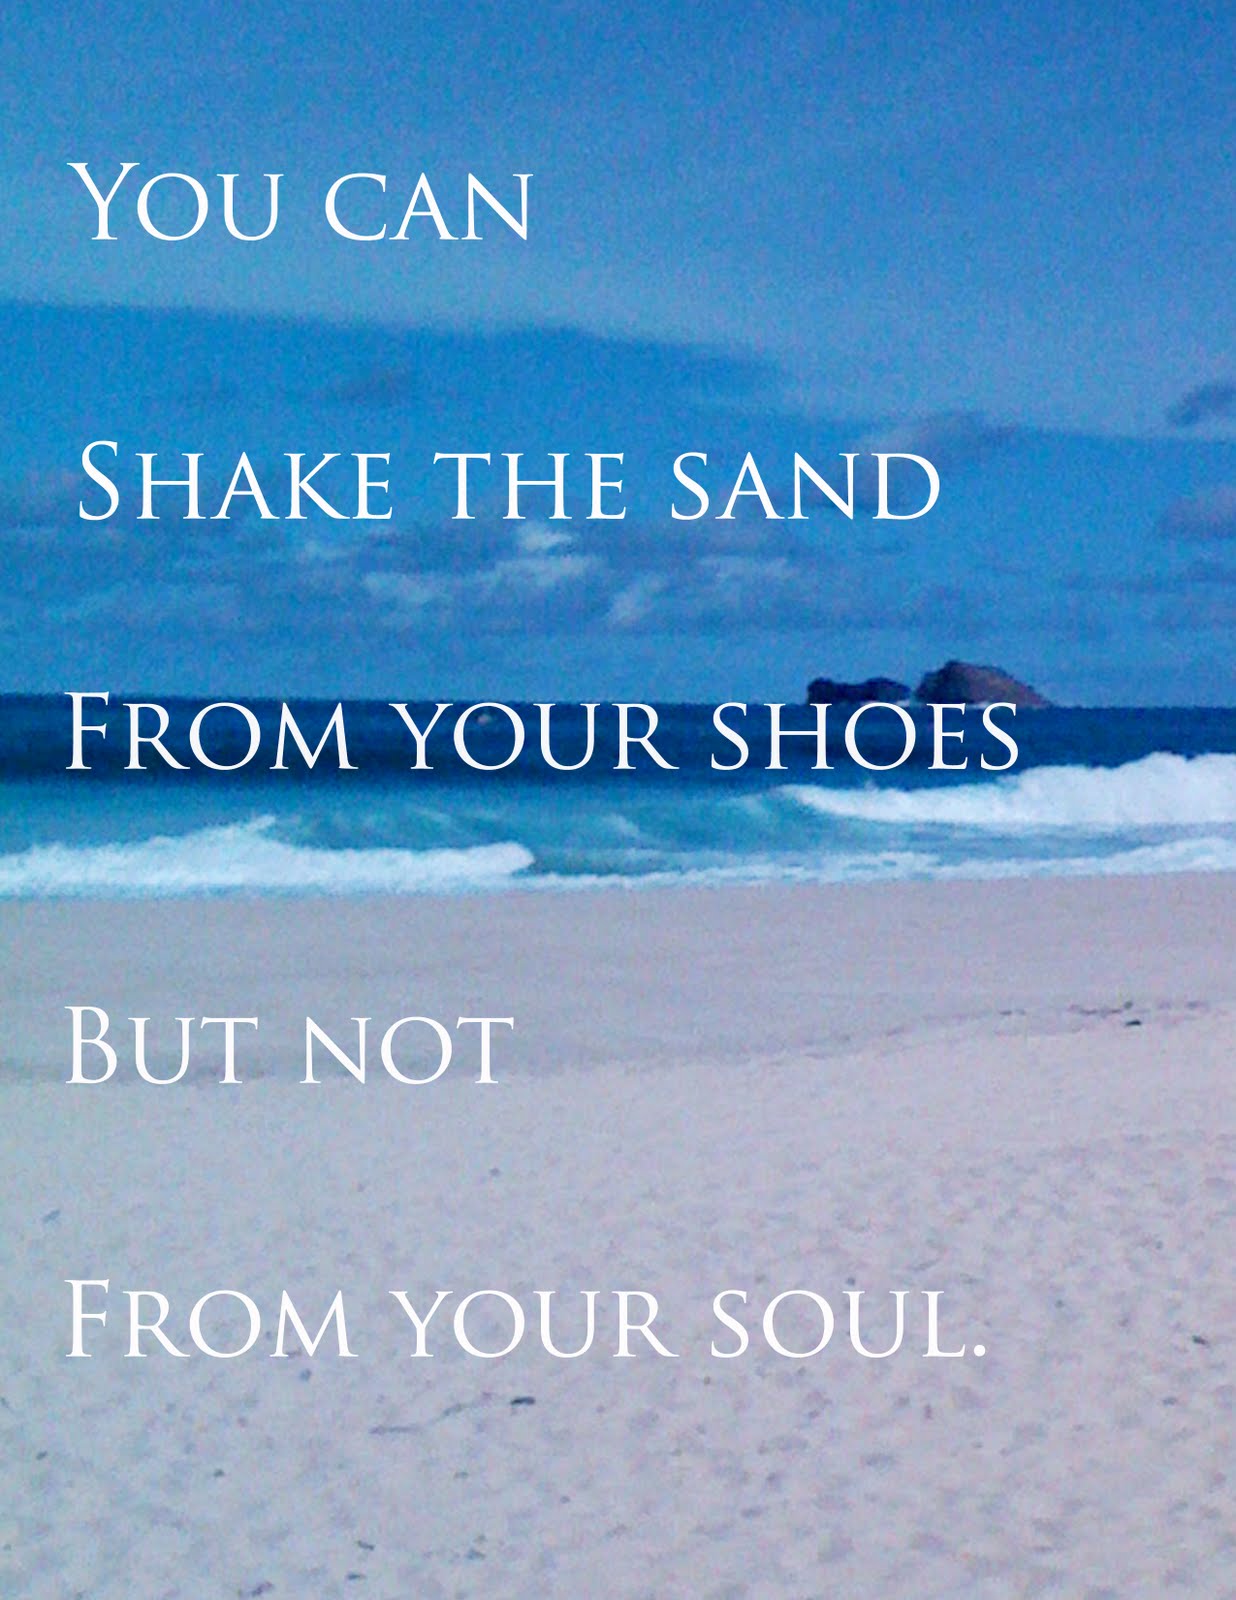 House At The Beach Quotes. QuotesGram